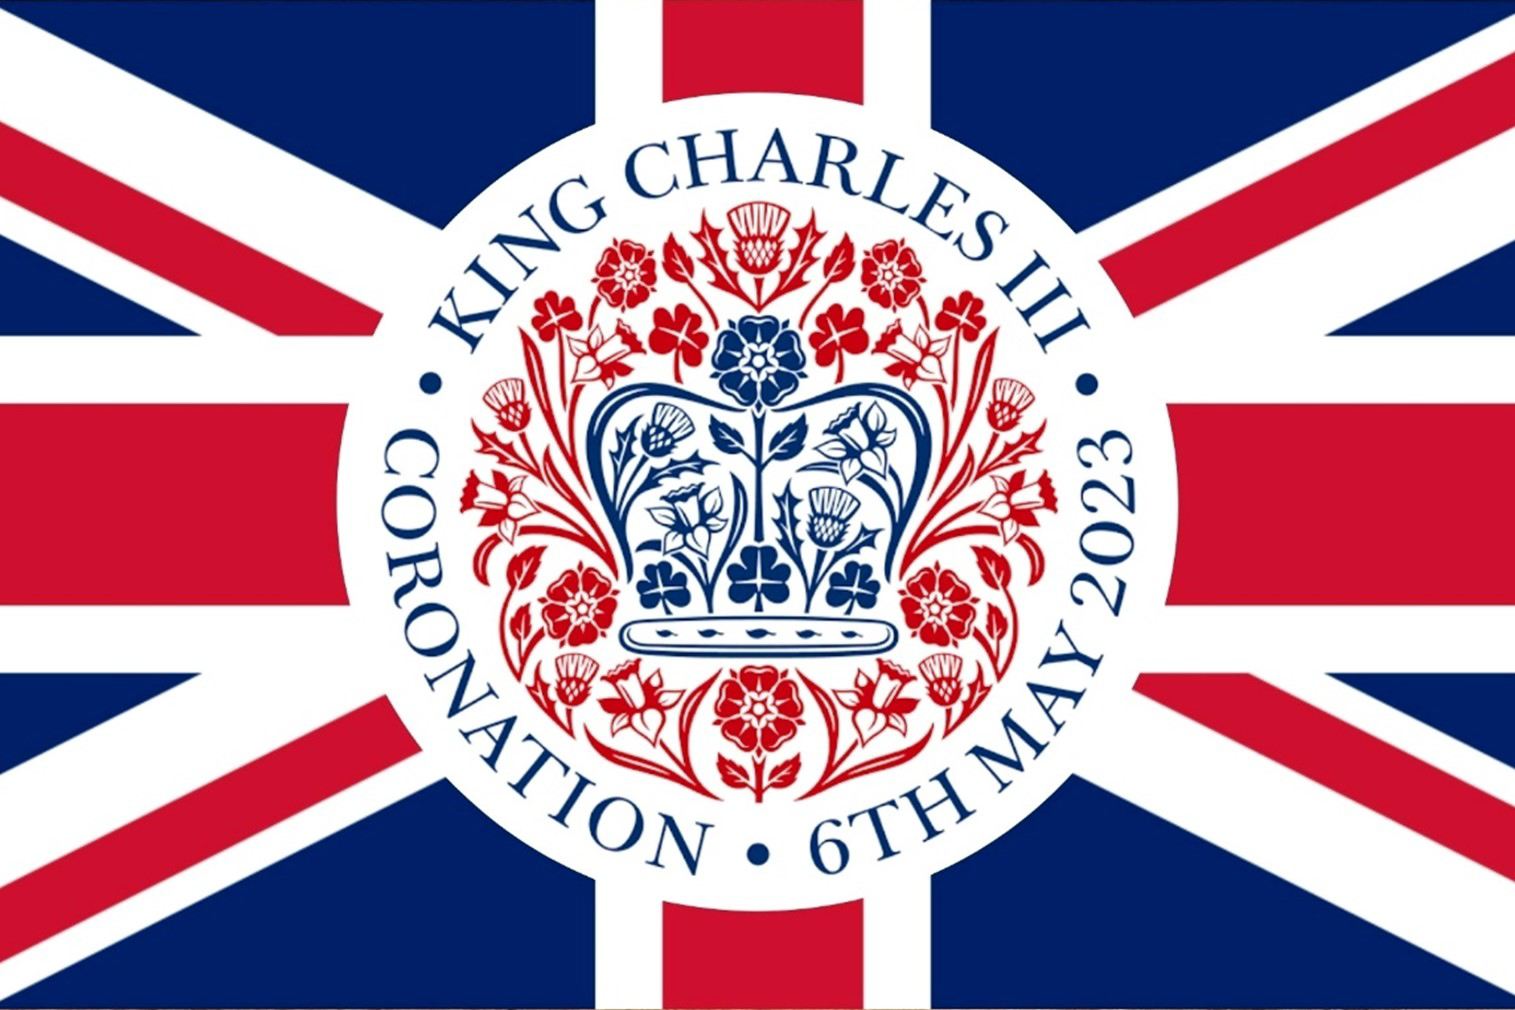 Congratulations to HRH King Charles III on his Coronation